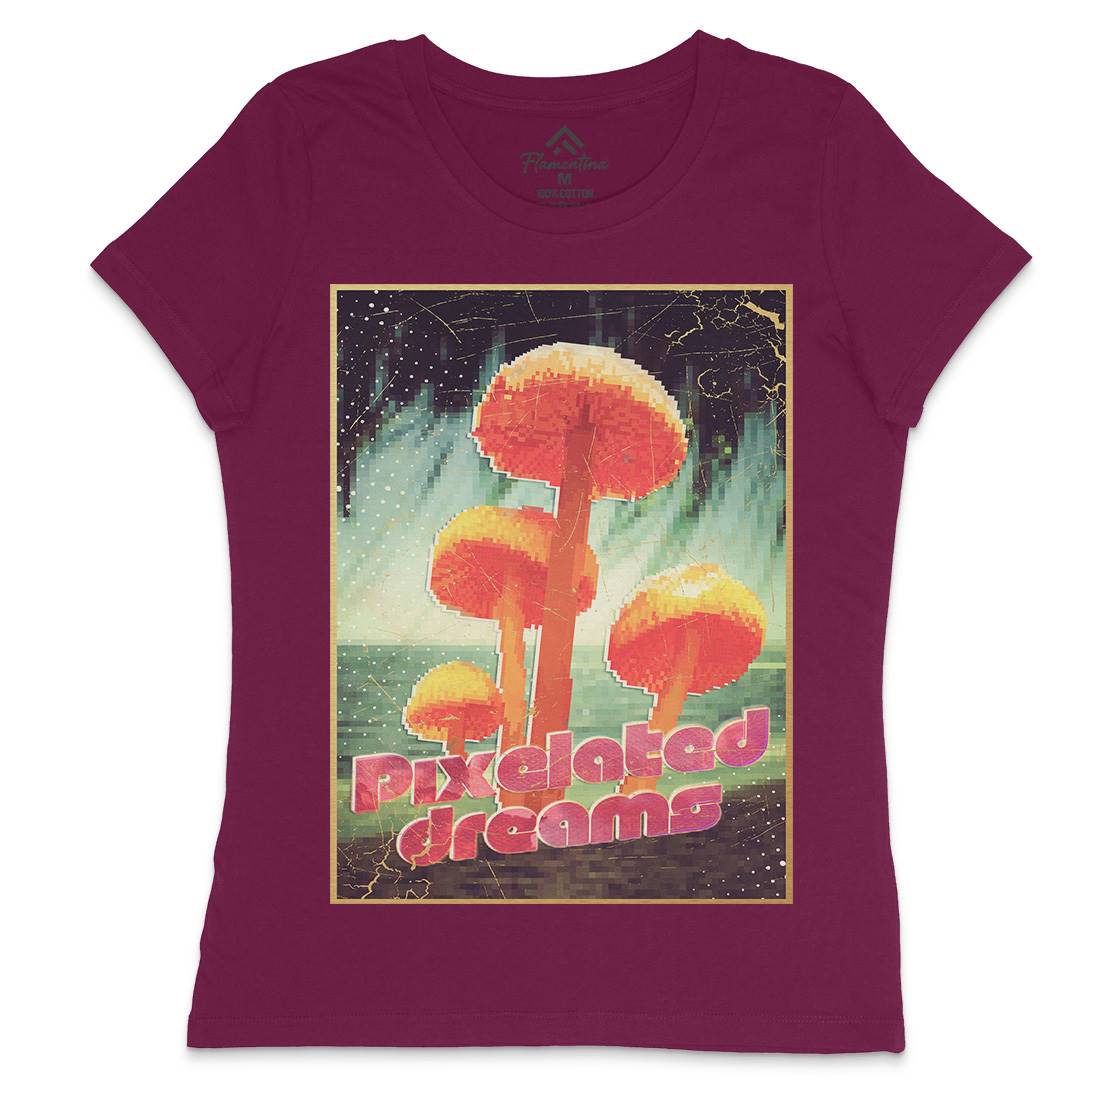 Pixelated Dreams Womens Crew Neck T-Shirt Drugs A893